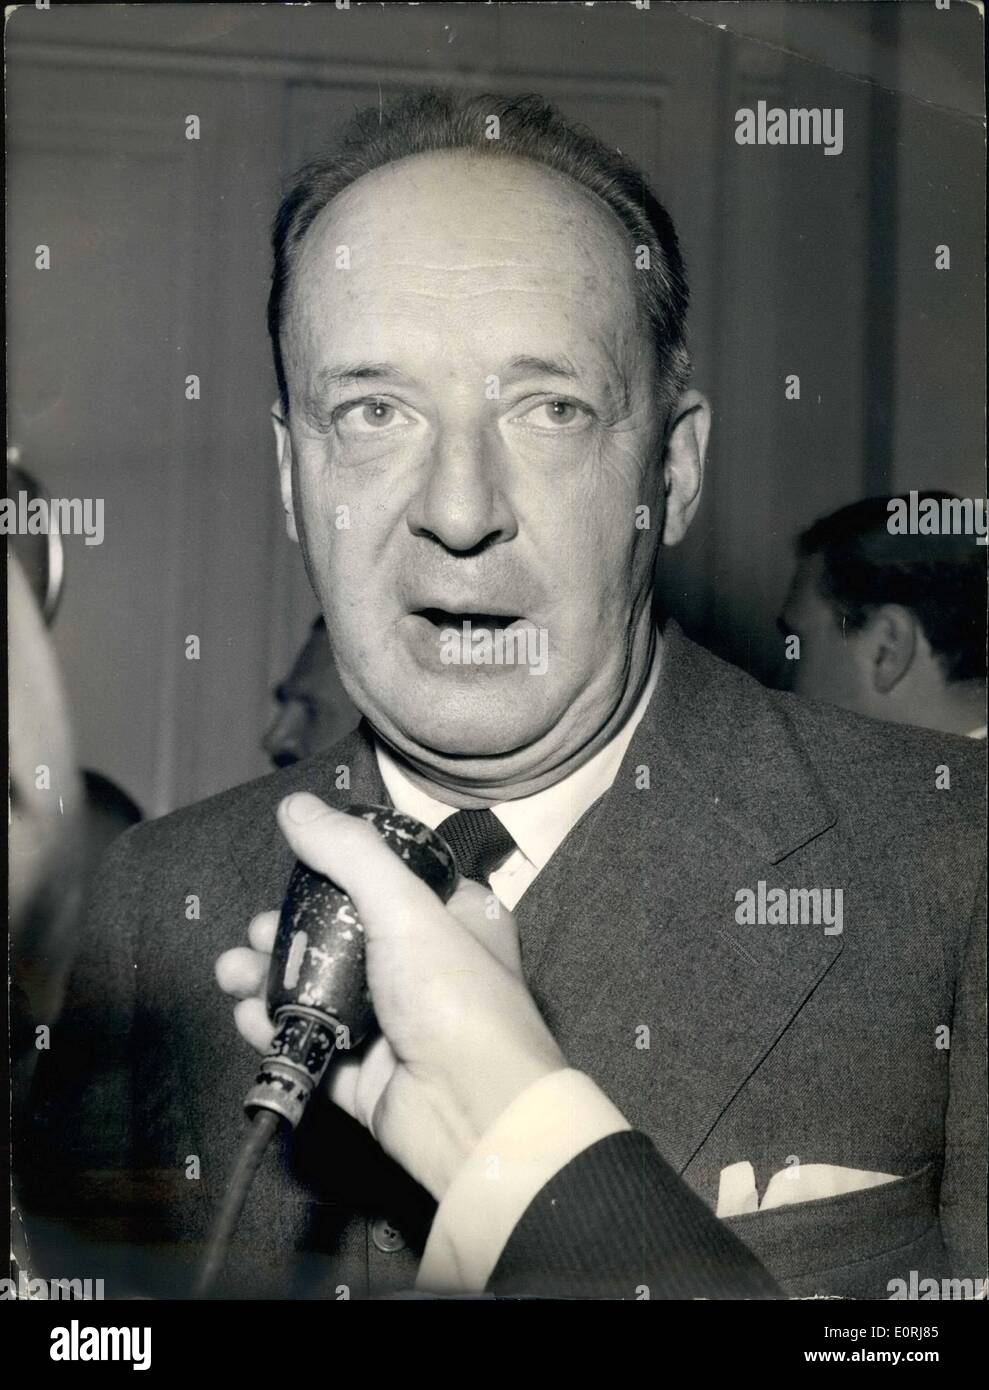 Oct. 10, 1959 - Author of ''Lolita'' in Paris: Vladimir Nabokov, author of ''Lolita'', the book that was first banned in America and now is one of the best sellers, arrived in Paris yesterday. Photo shows Nabokov photographed during the cocktail party at his publishers in Paris yesterday evening. Stock Photo